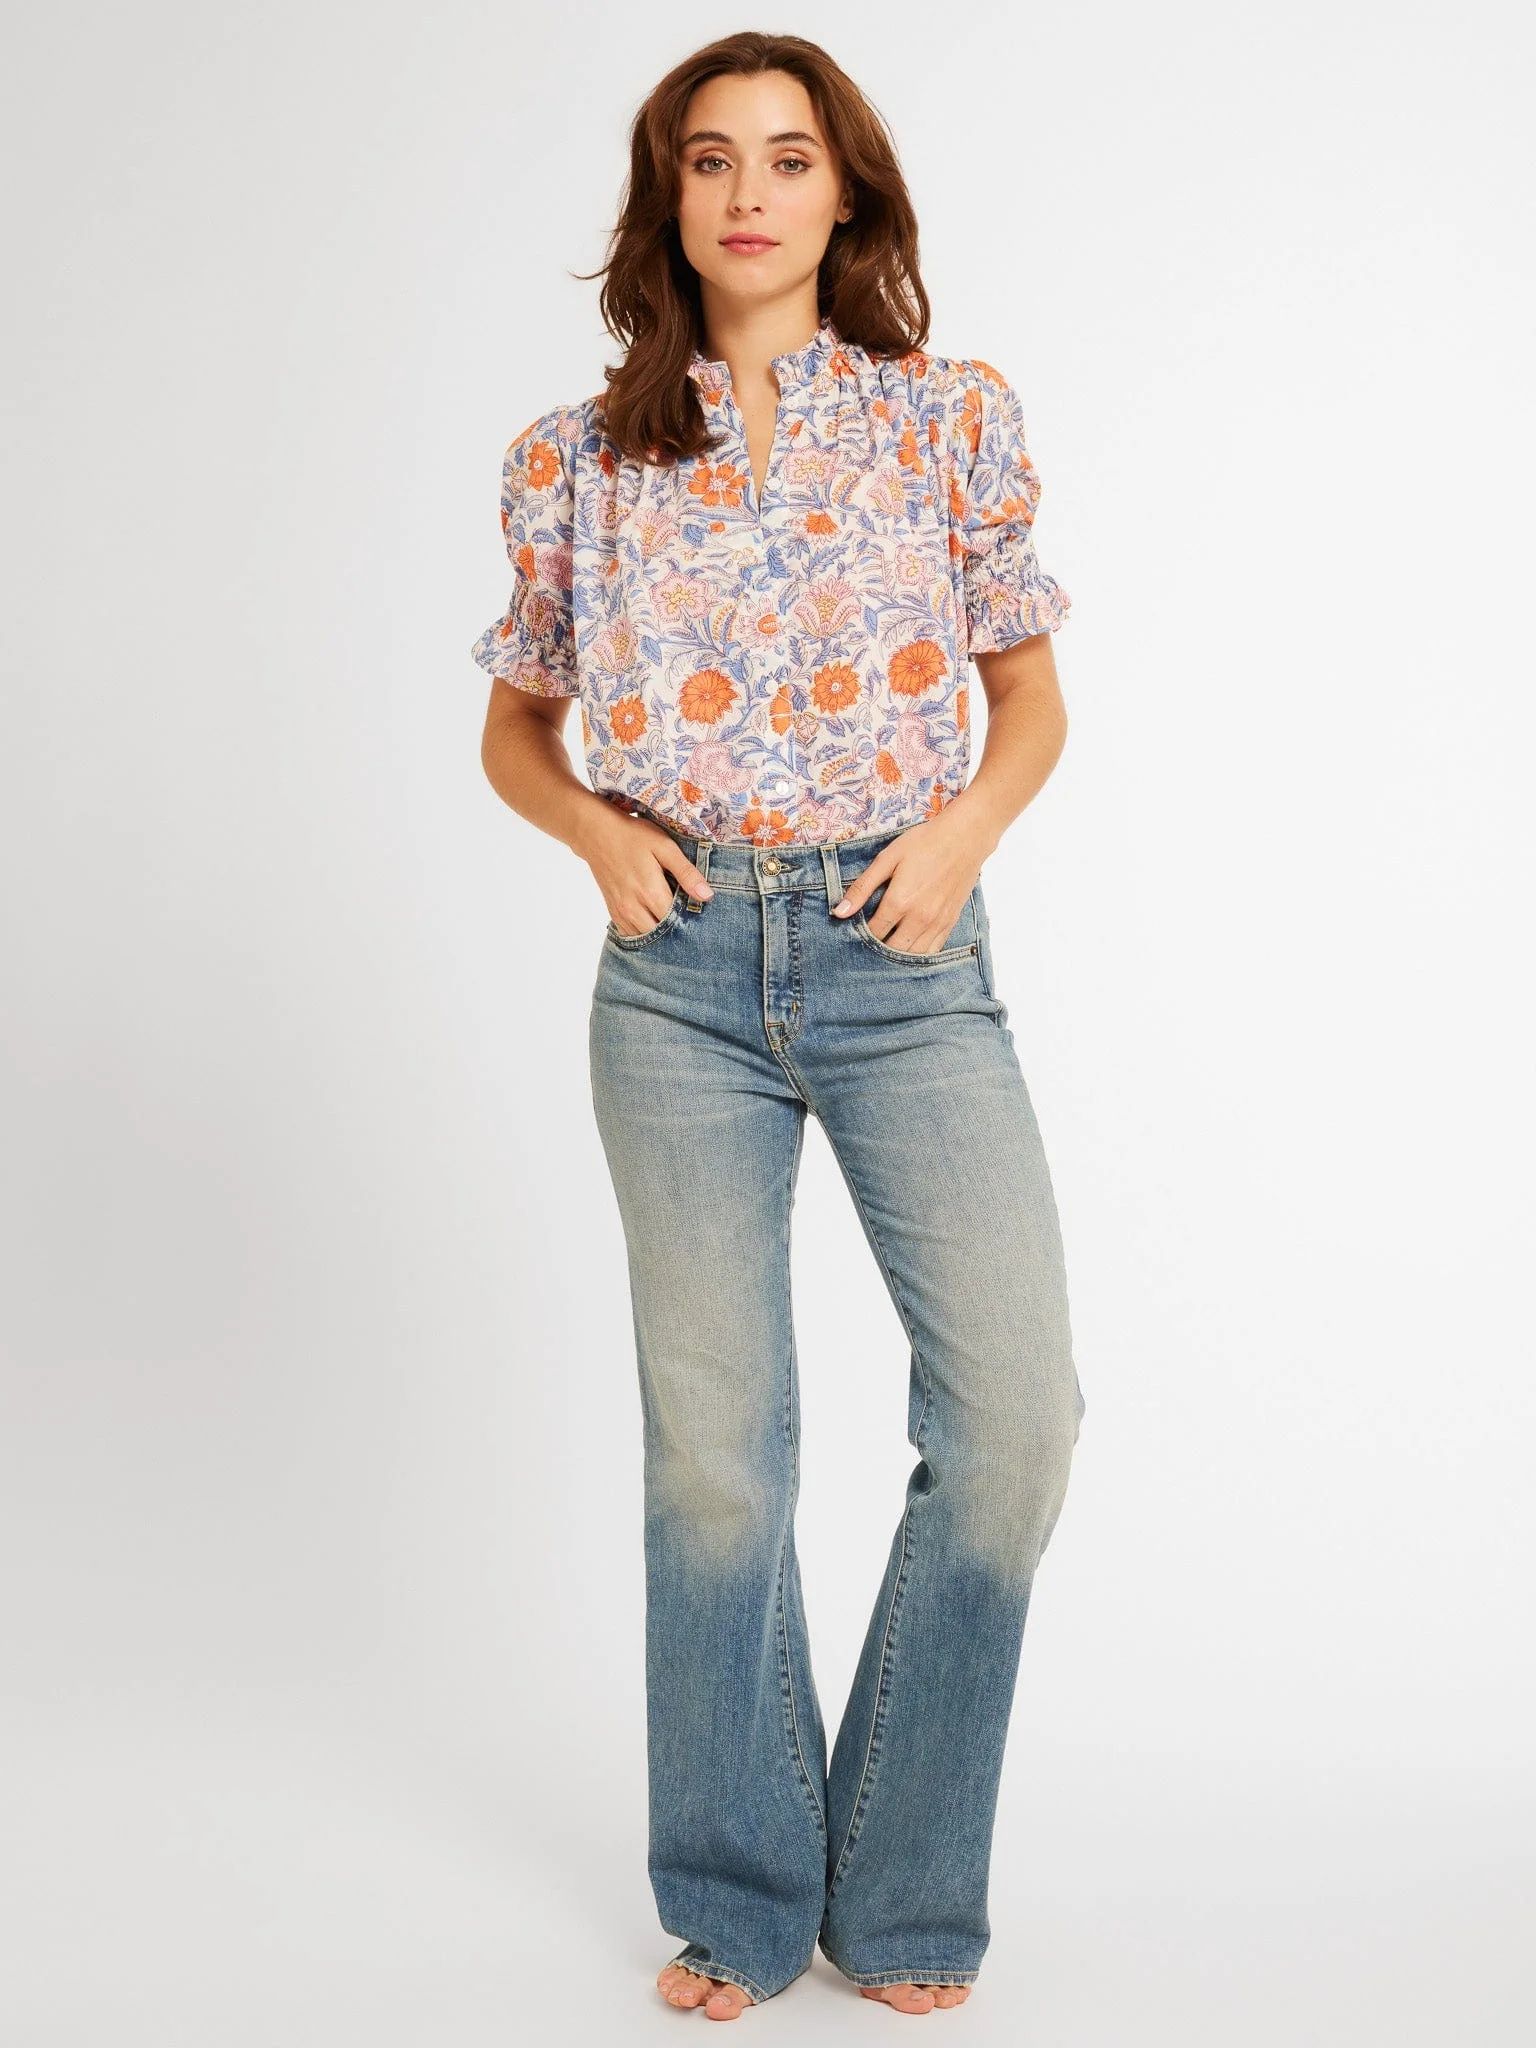 Marnie Top in Newport Floral | Mille